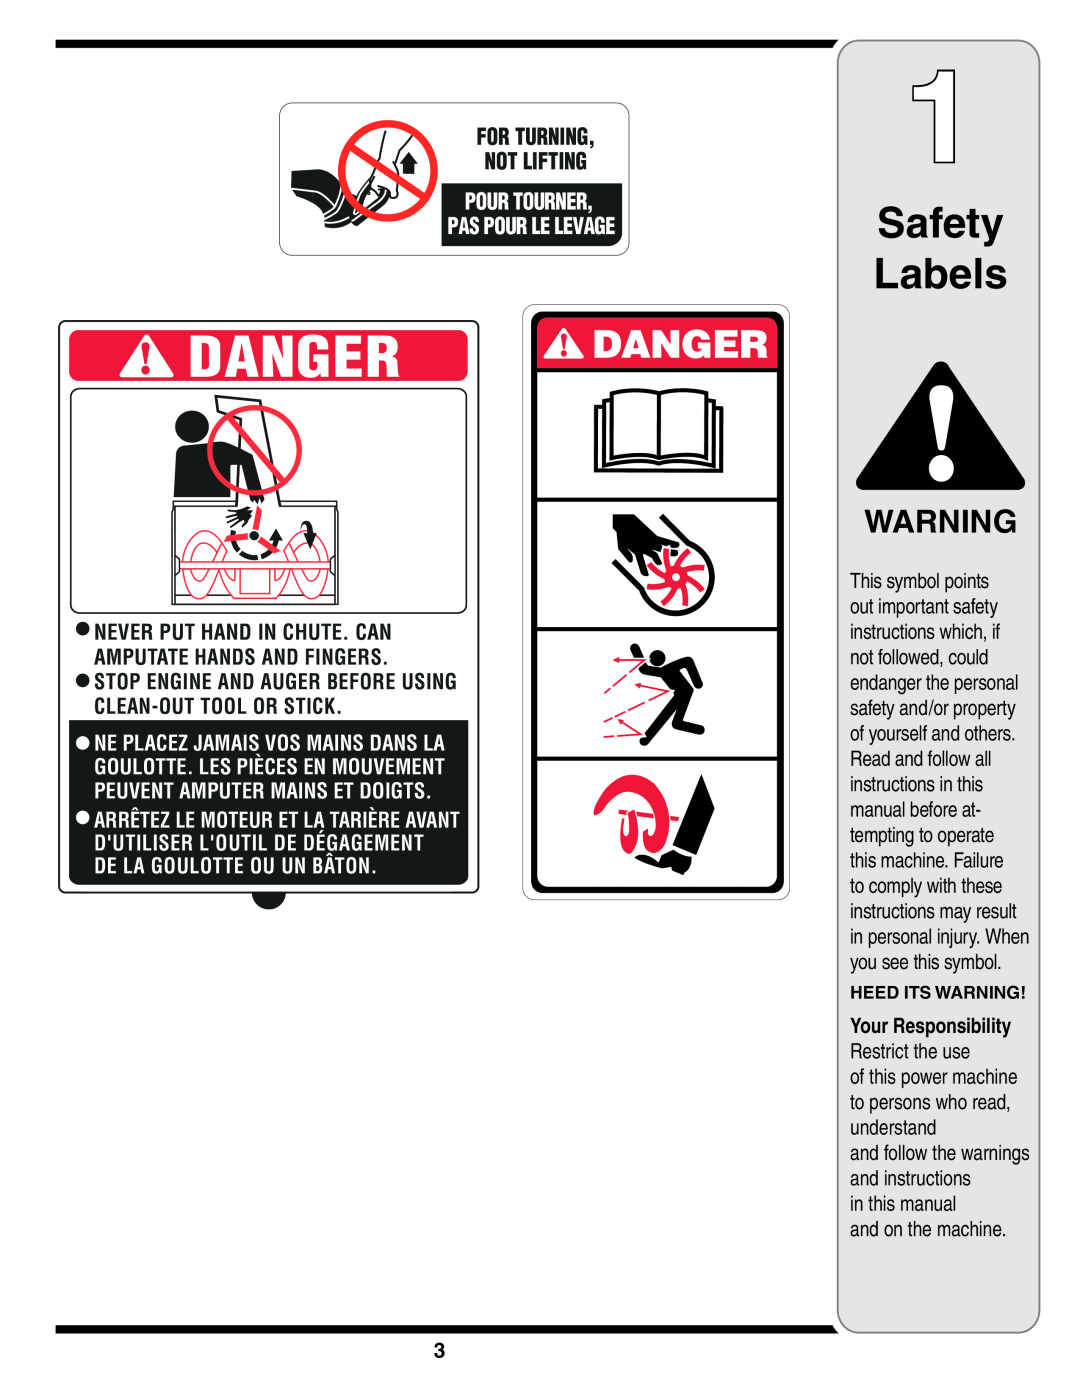 MTD 260 Danger, Safety Labels, For Turning Not Lifting, Pour Tourner Pas Pour Le Levage, in this manual and on the machine 